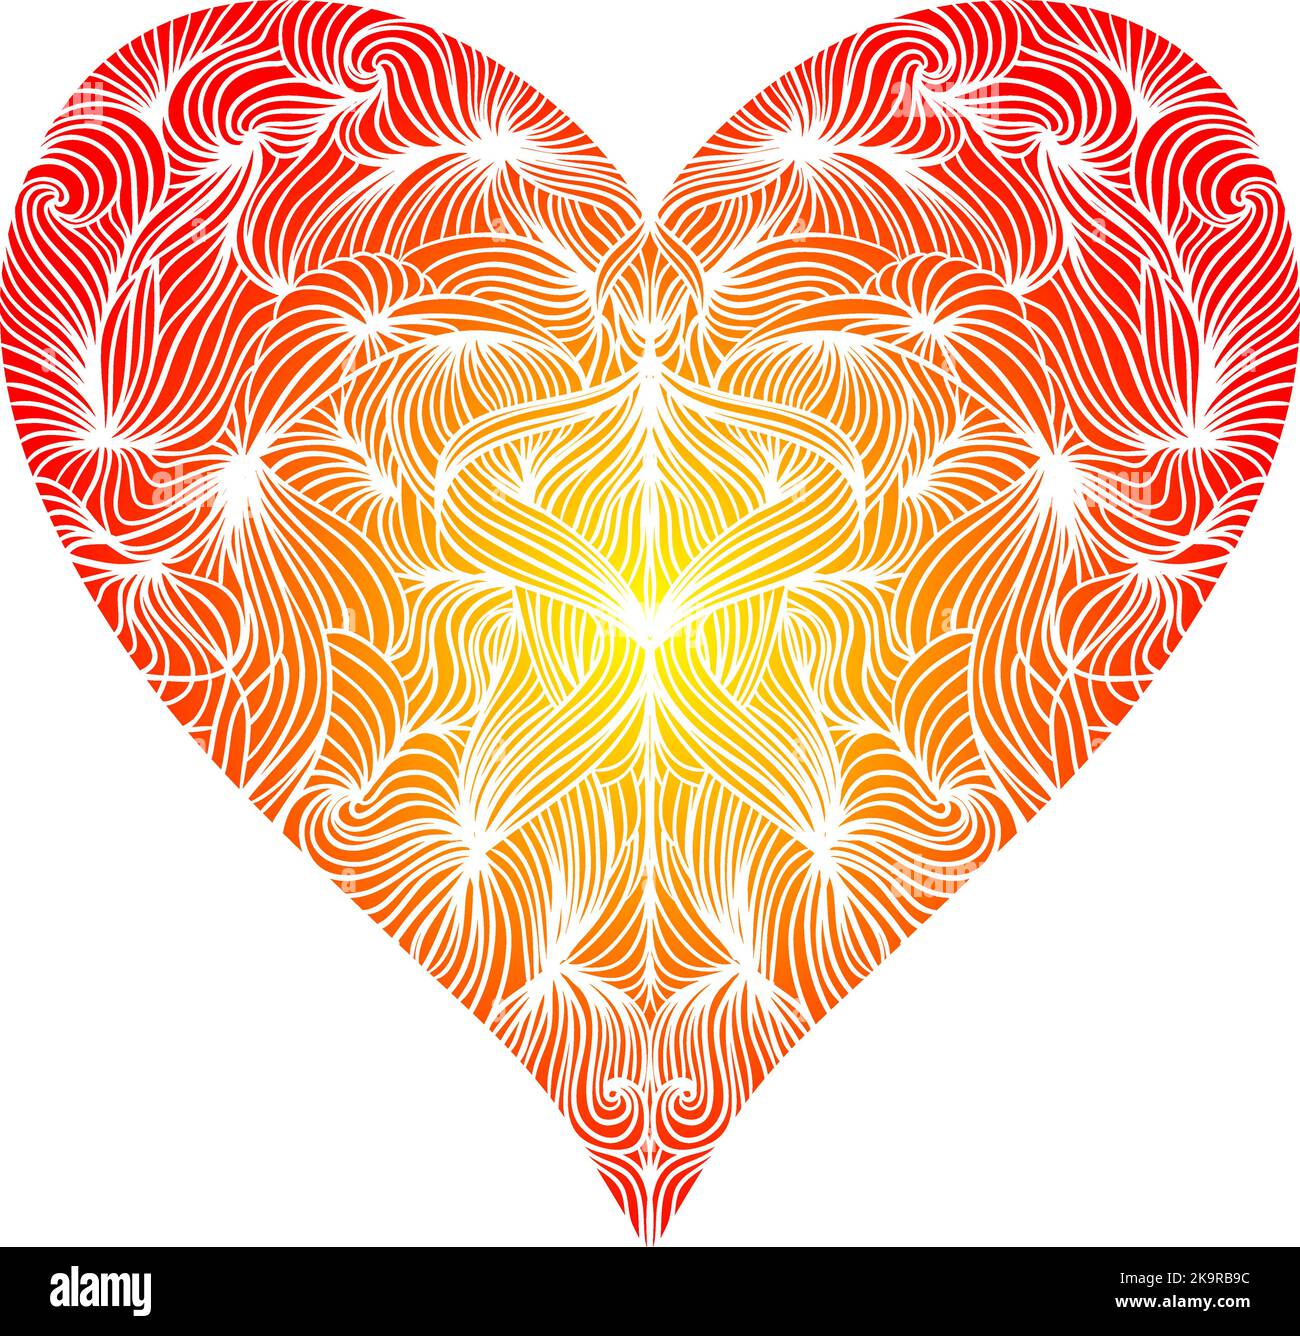 Abstract illustration of stylized colorful heart. Stock Vector